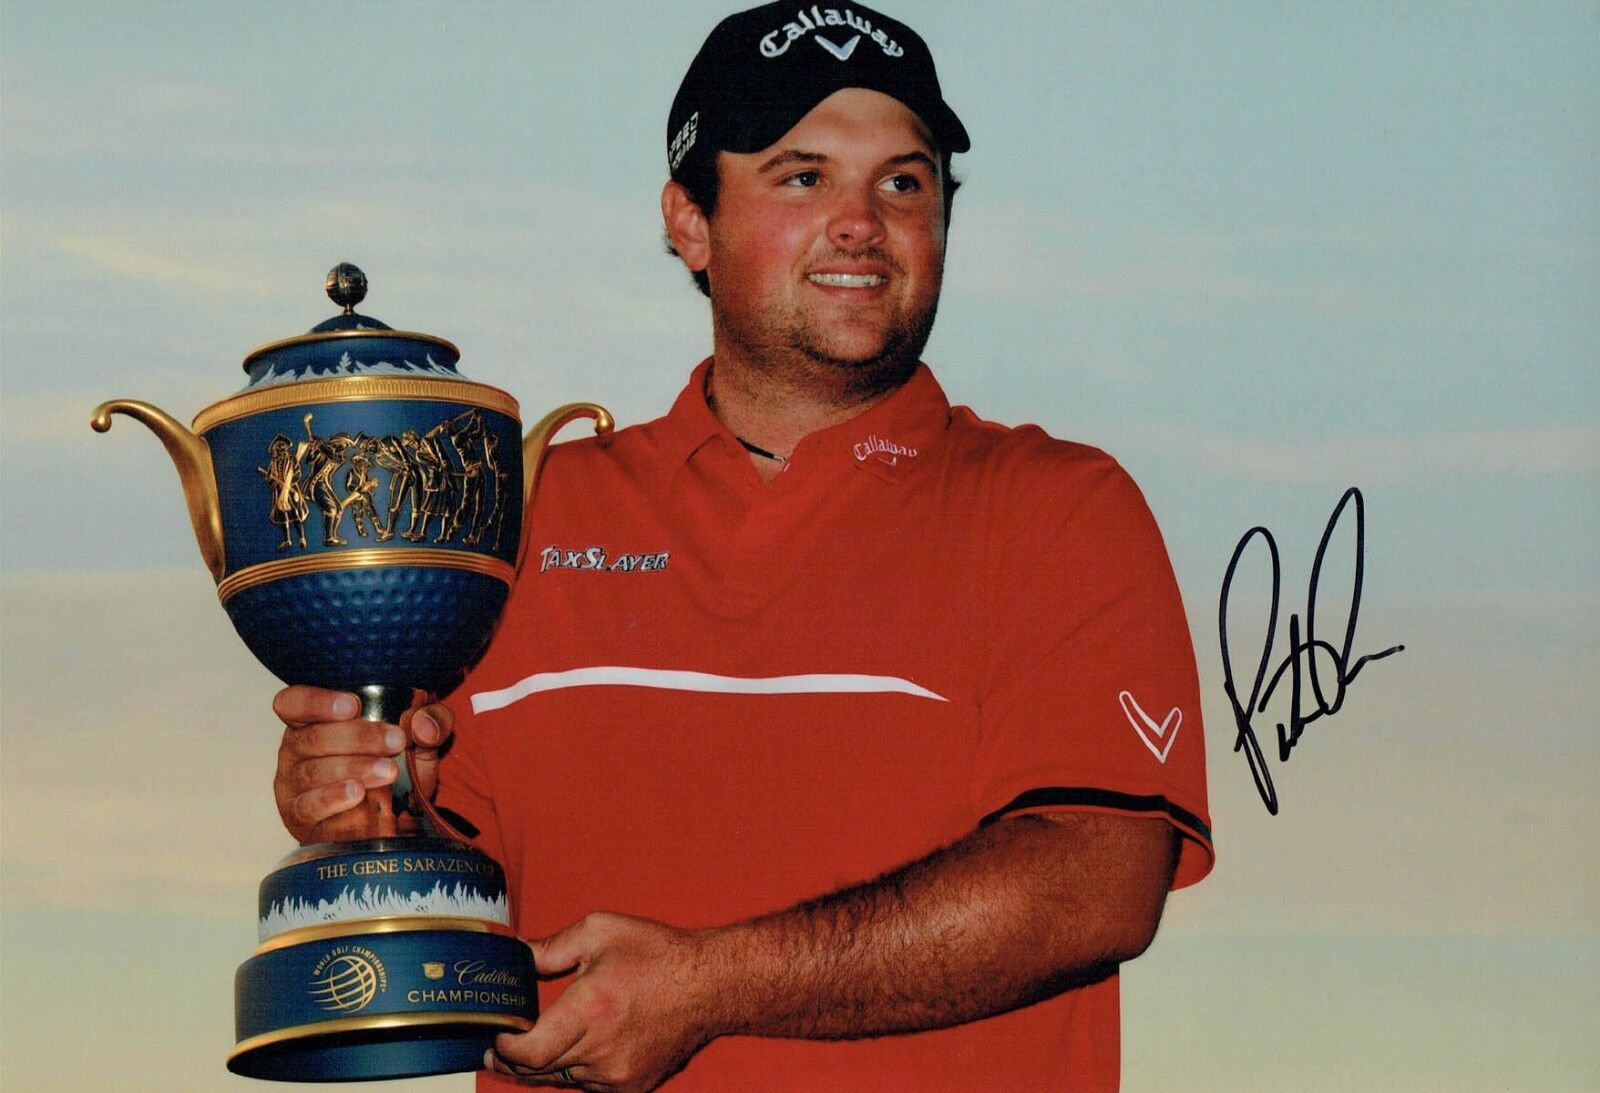 Patrick REED SIGNED 12x8 Photo Poster painting 1 AFTAL Autograph COA Golf PGA Tour Winner